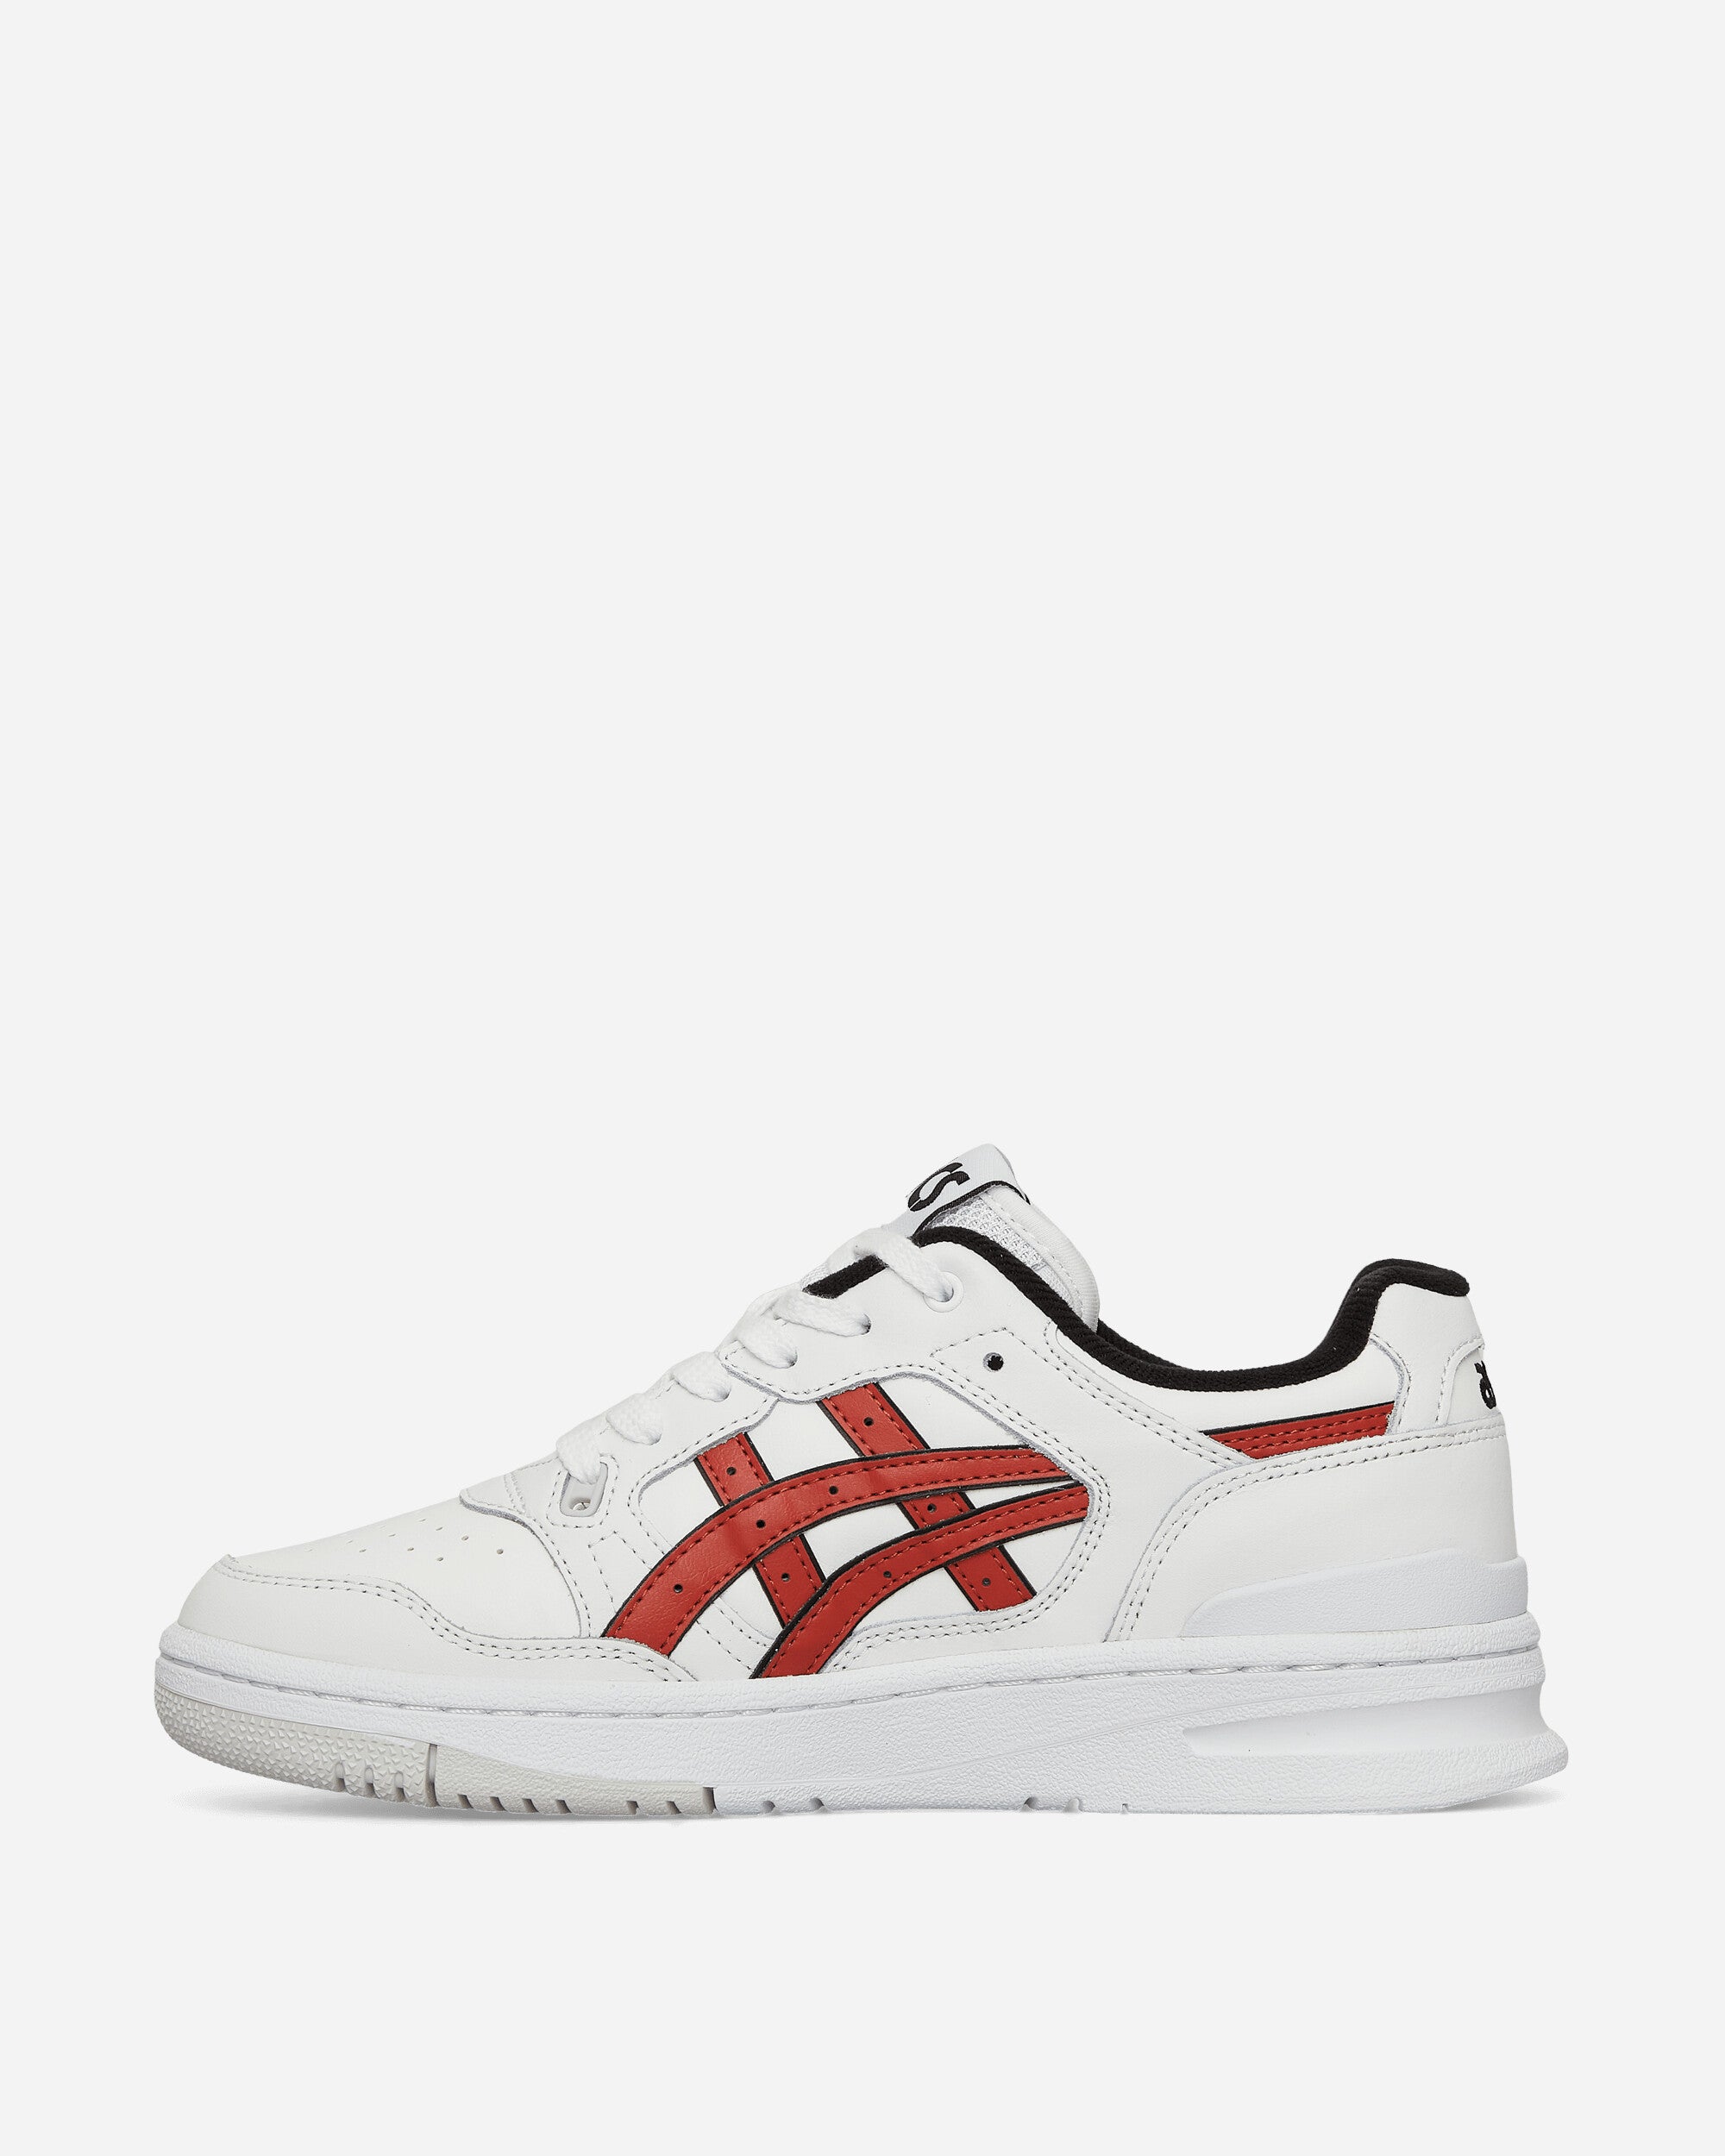 Asics Ex 89 White/Spice Latte Sneakers Low 1201A476-113